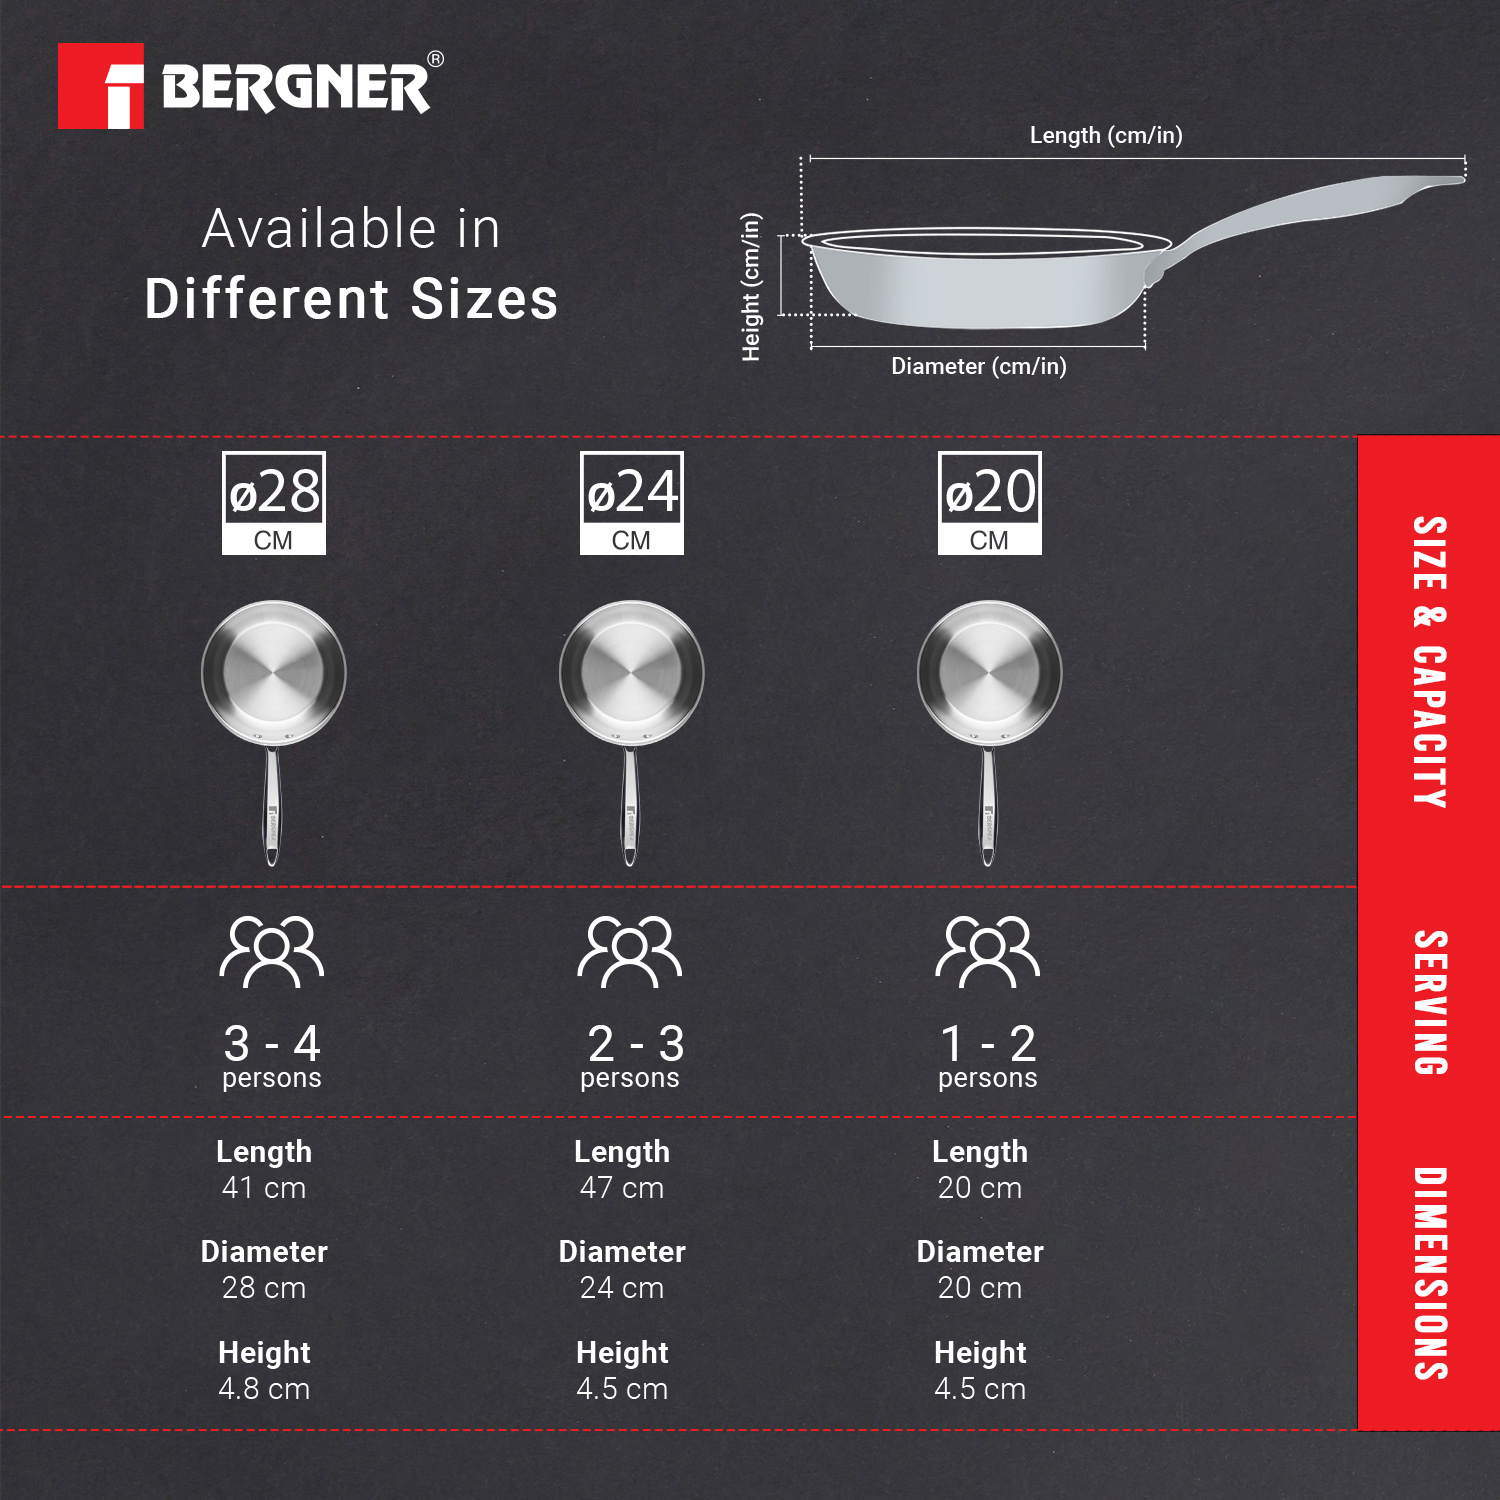 Bergner Argent 5CX 5 Ply Stainless Steel Silver Frypan in 24 cm size